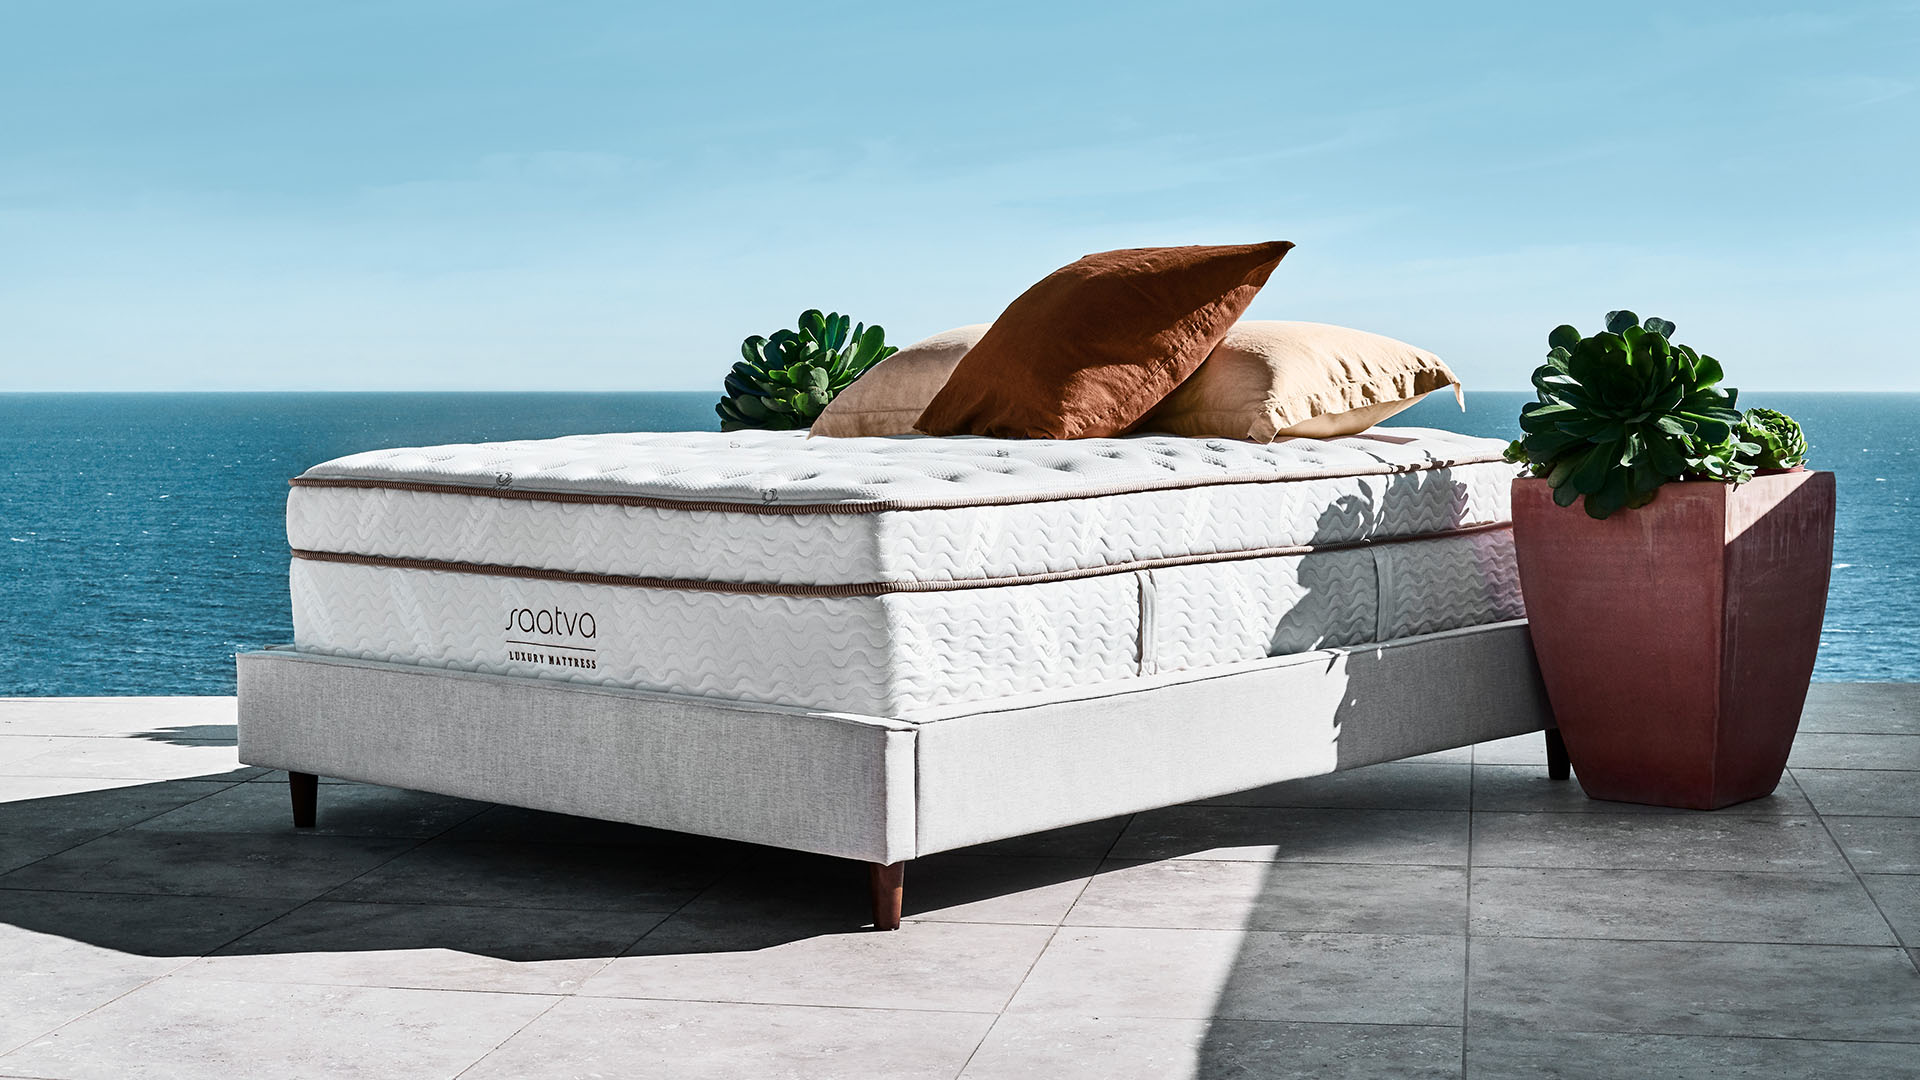 Saatva Classic mattress on a grey bed frame in an outdoor space overlooking a blue ocean